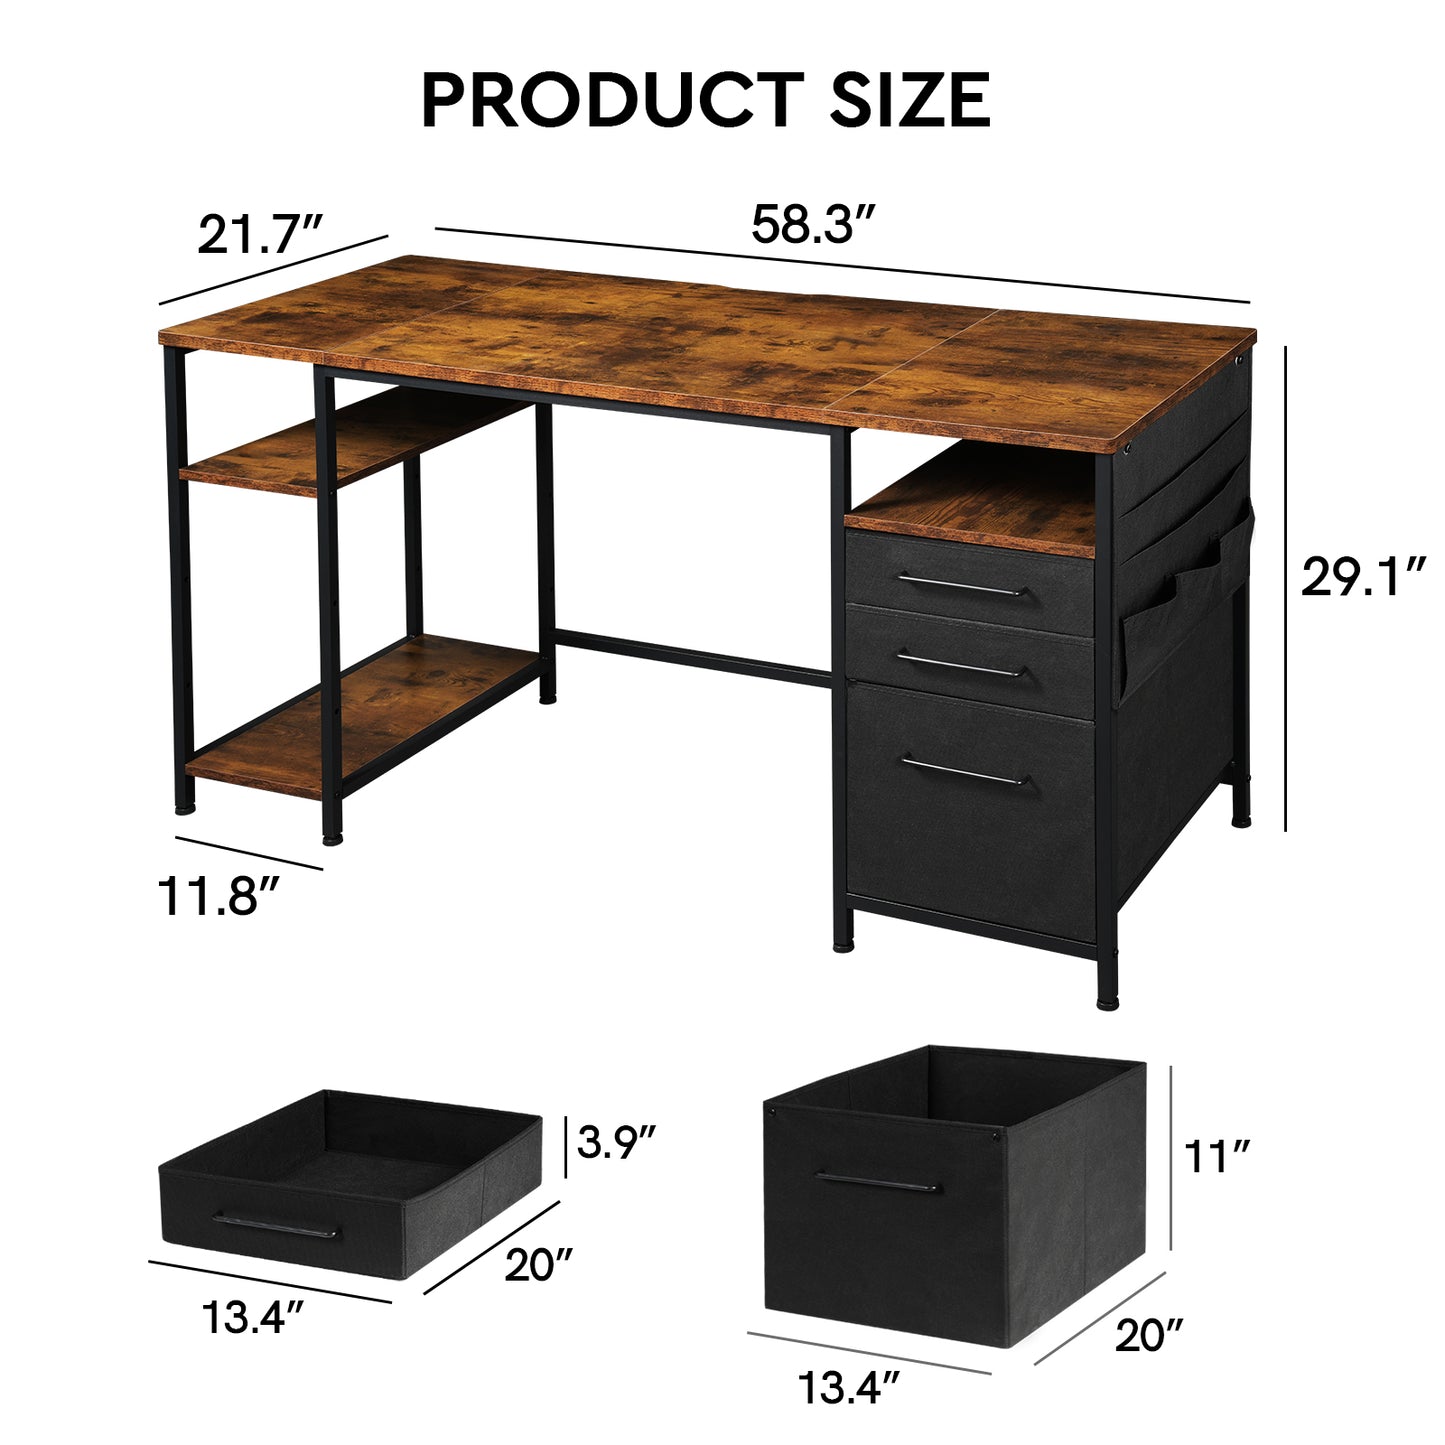 MAIHAIL 59 inch Desk with Drawers, Rustic Brown+ Black